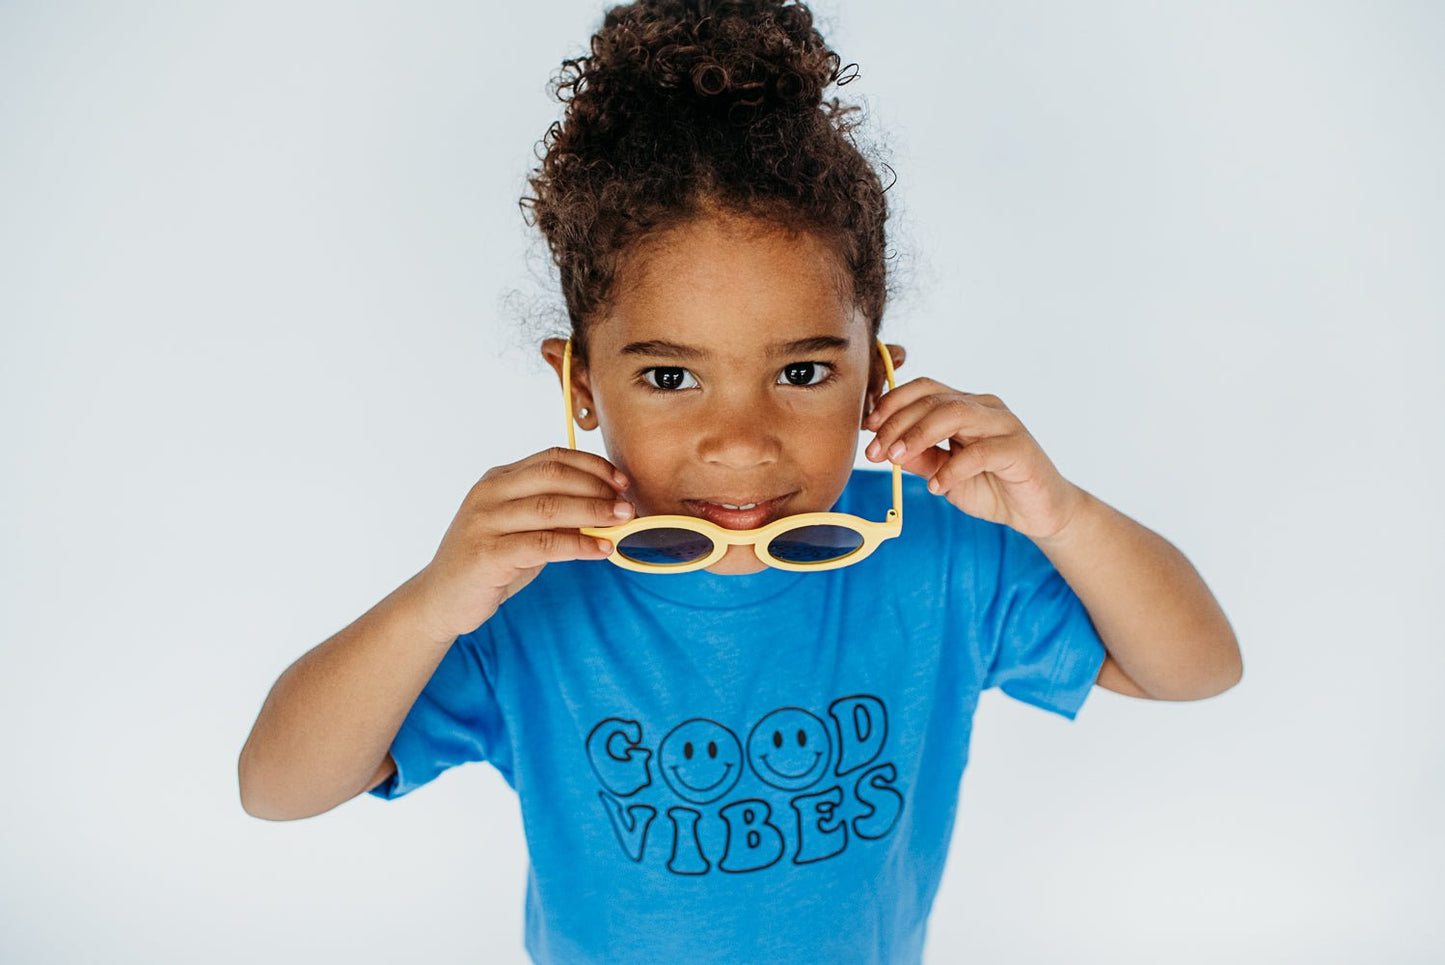 Good Vibes YOUTH T-shirt - Cal and Chlo Co